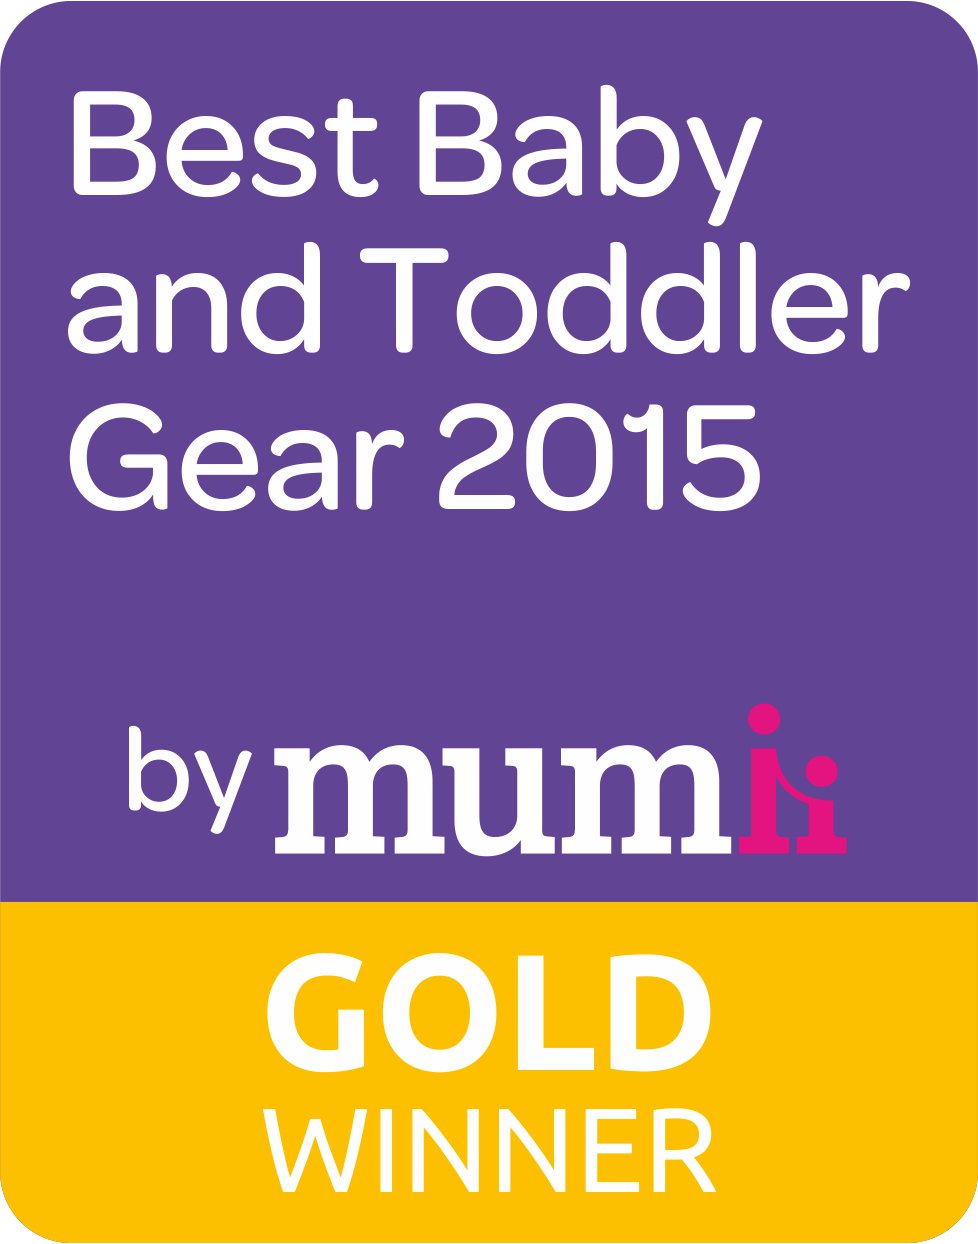 Nagroda Best Baby and Toddler Gear 2015 dla Tidy Tot